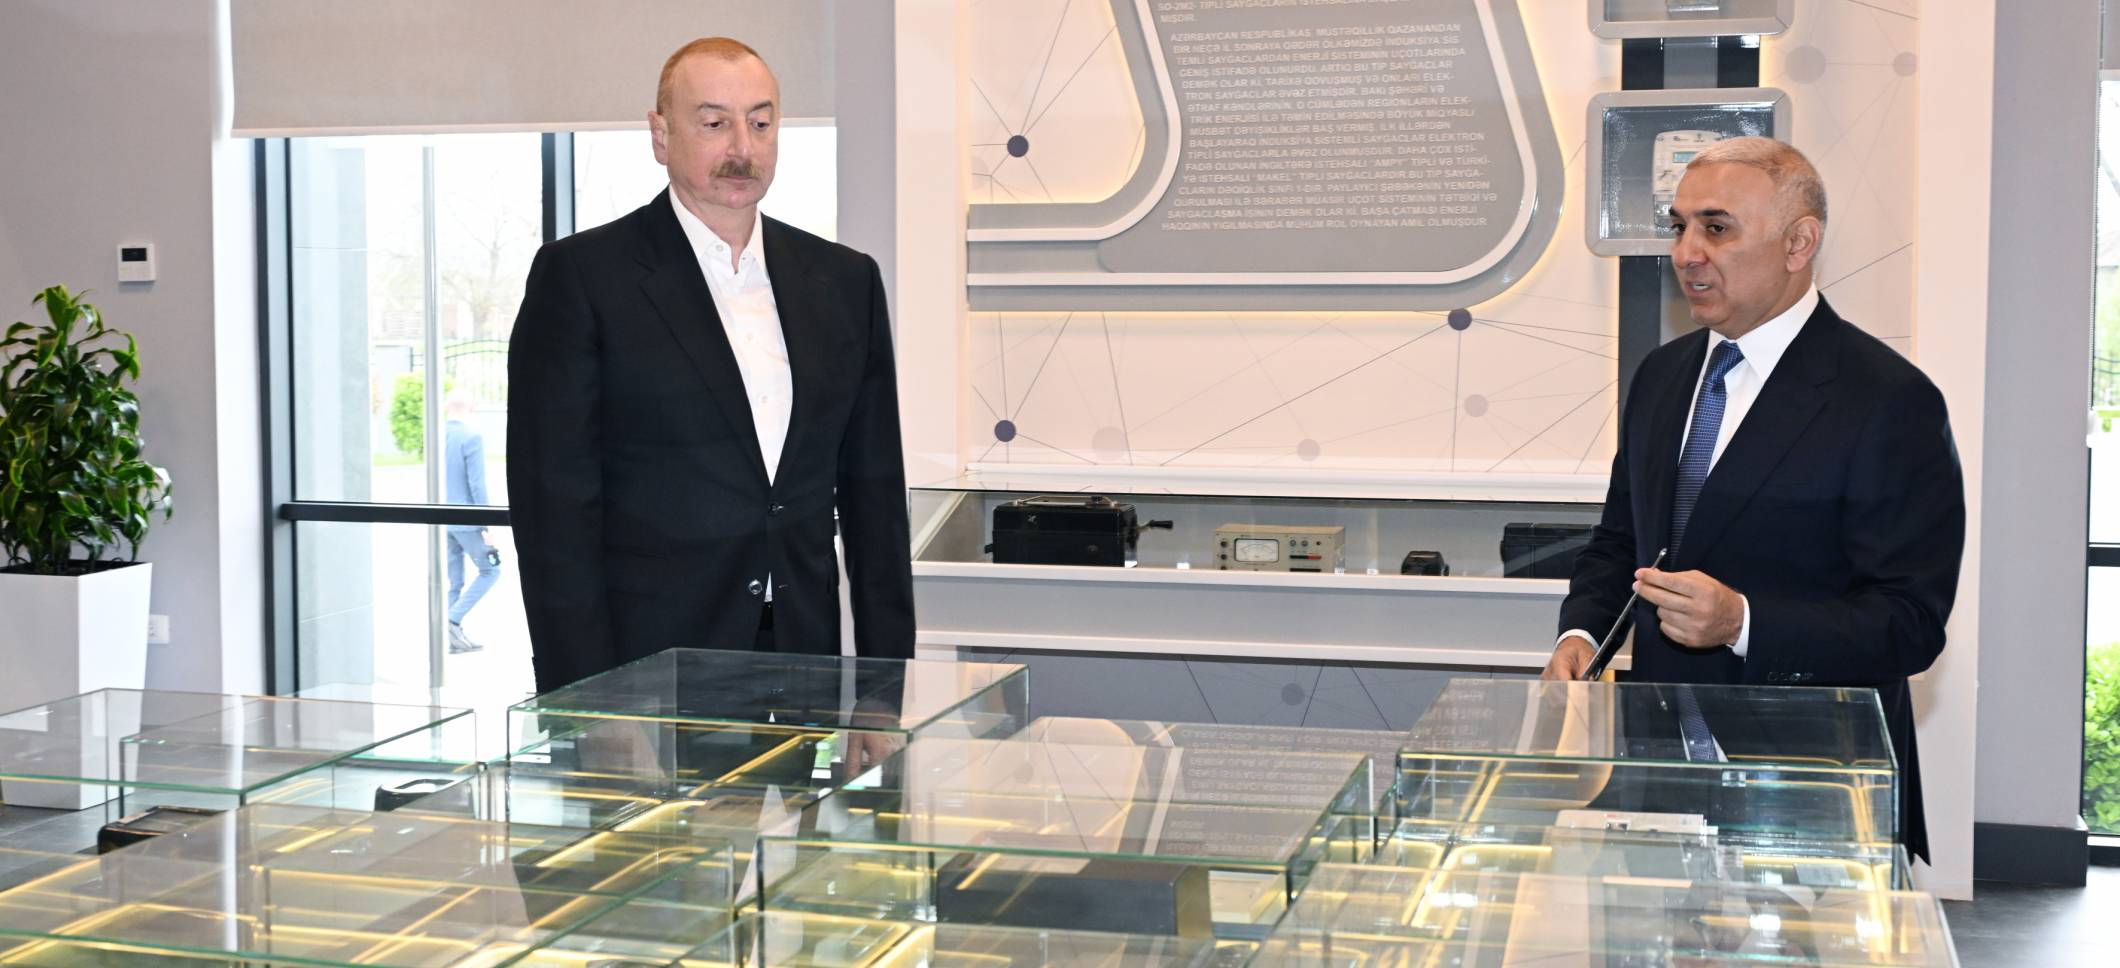 Ilham Aliyev has participated in the opening ceremonies of the 110/35/10 kV "Hajialili" power substation and the Regional Training Center owned by Azerishig OJSC